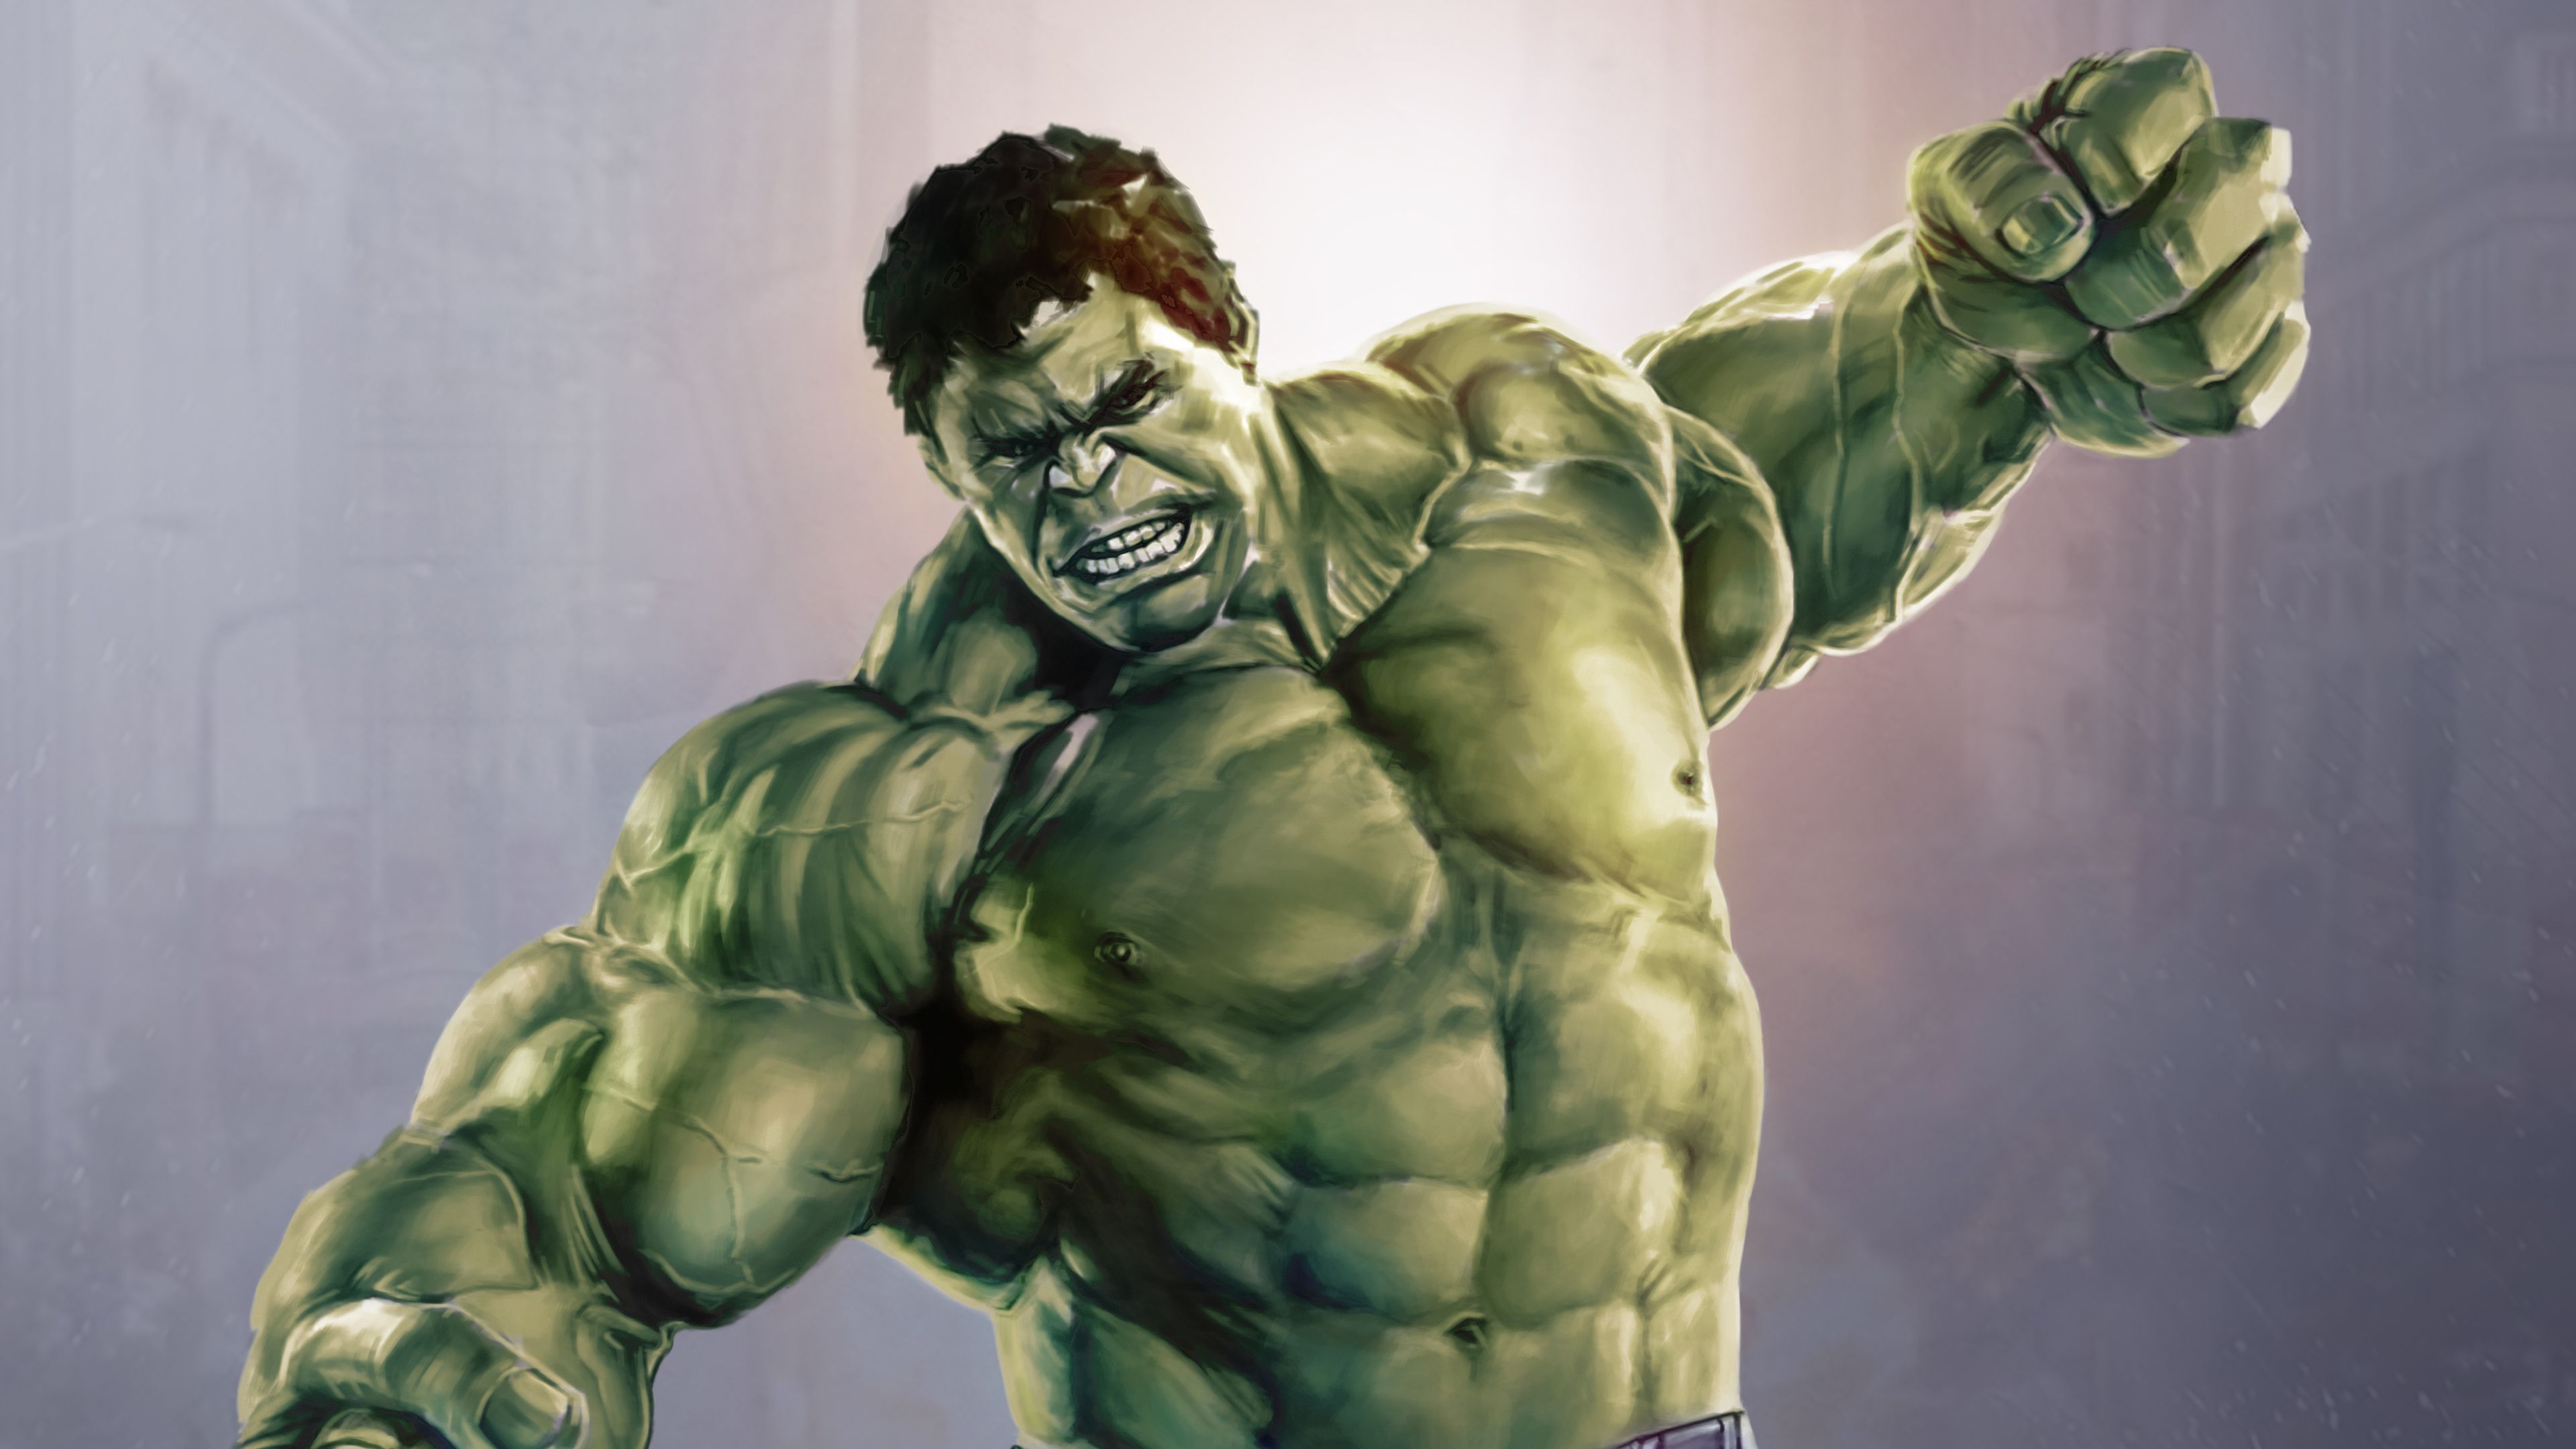 54 Hulk Wallpapers HD 4K 5K for PC and Mobile  Download free images  for iPhone Android